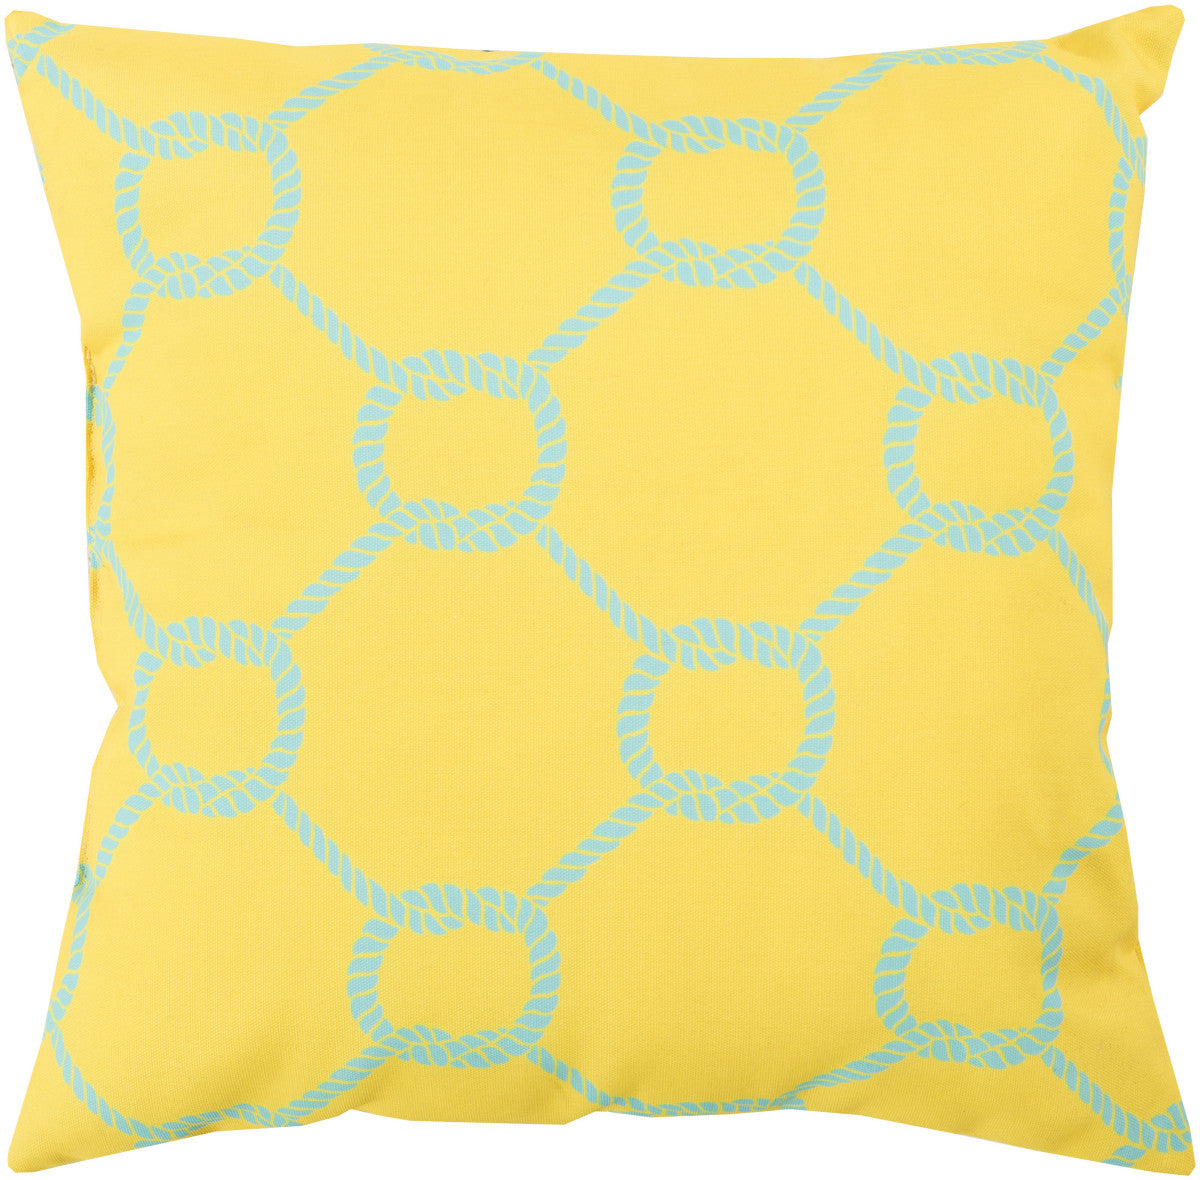 Surya Rain Tied up in Delight RG-144 Pillow